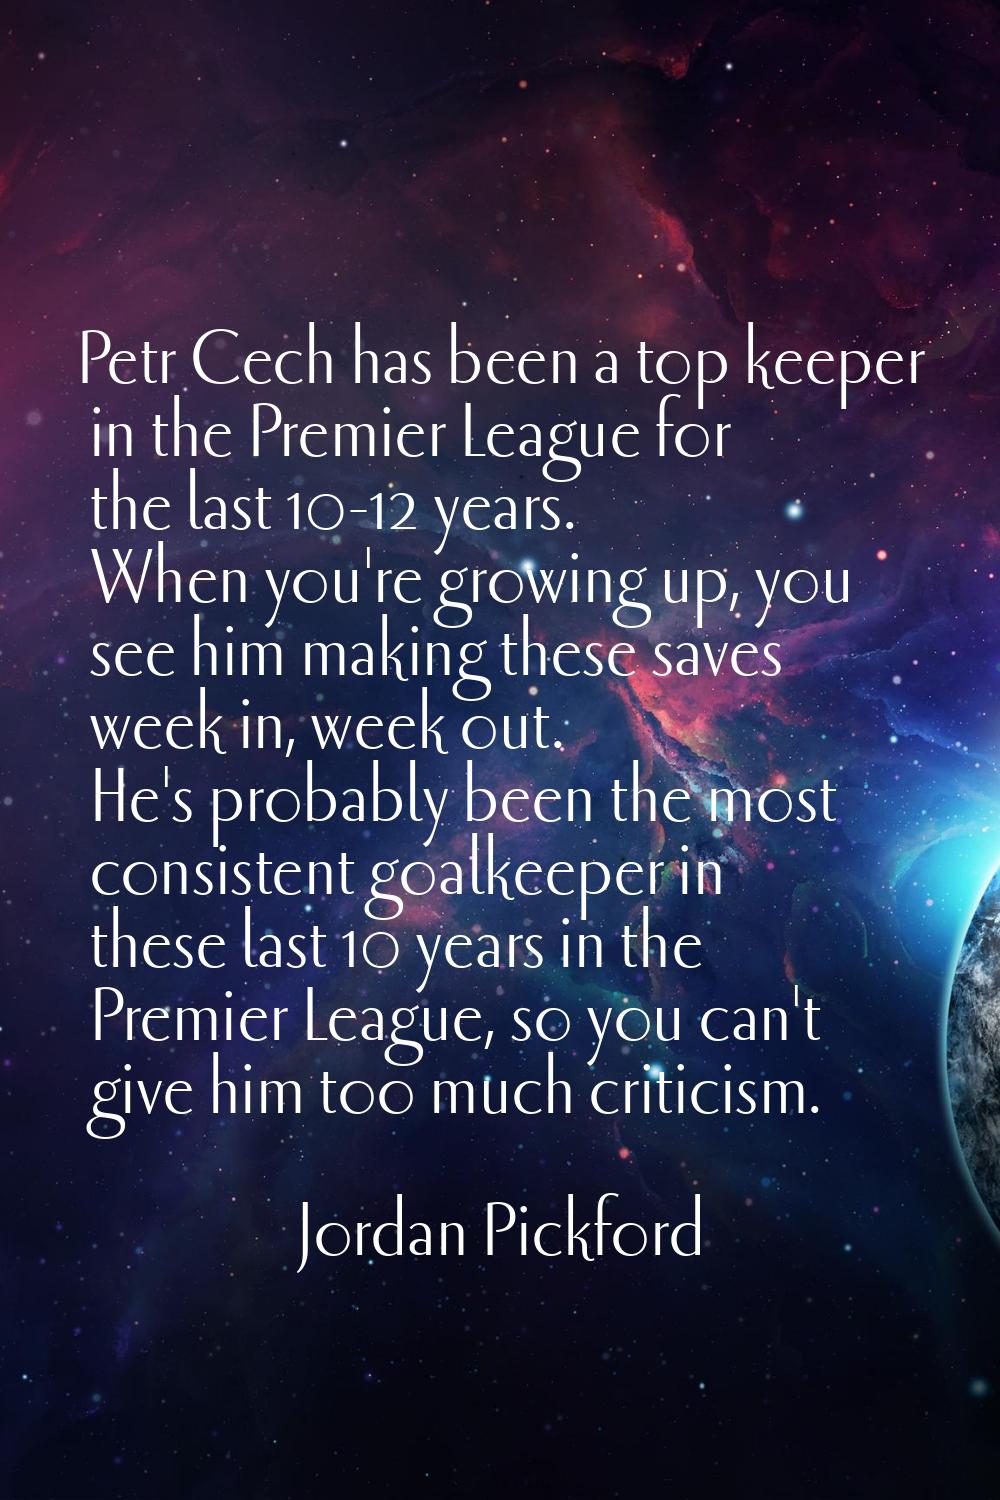 Petr Cech has been a top keeper in the Premier League for the last 10-12 years. When you're growing